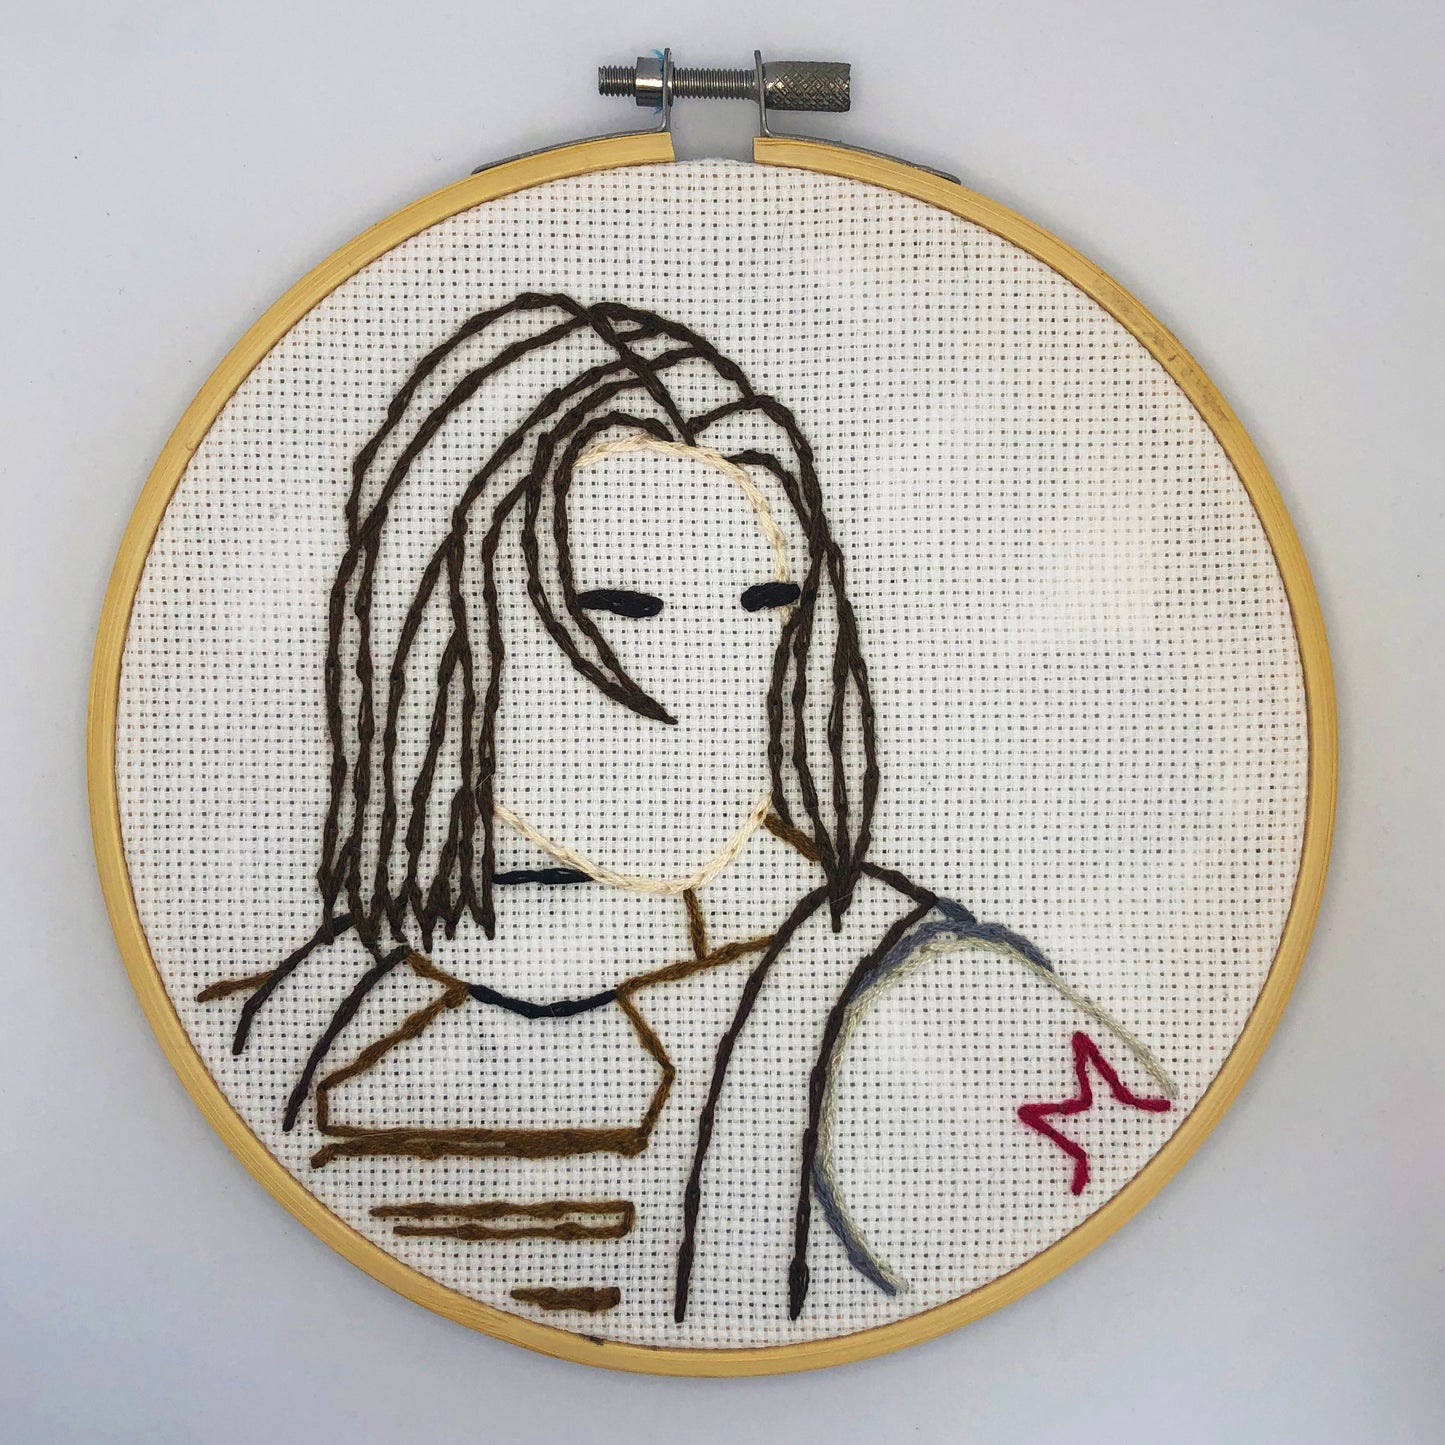 Marvel embroidery